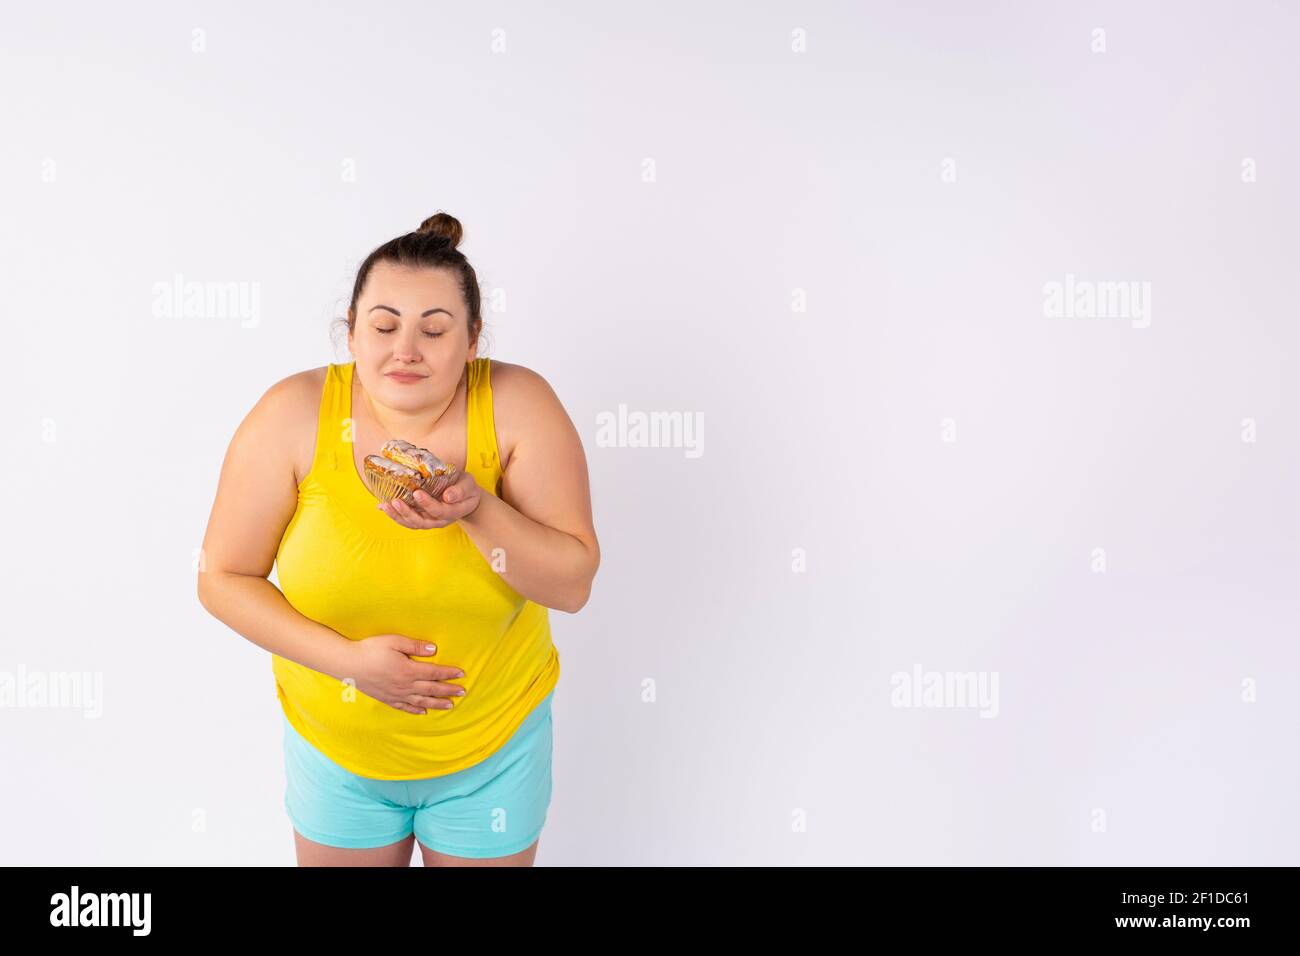 Photo of an obese woman in front of a white background, holding a plate of sweet cookies, weakened by emotion and desire, in the process of dieting Stock Photo